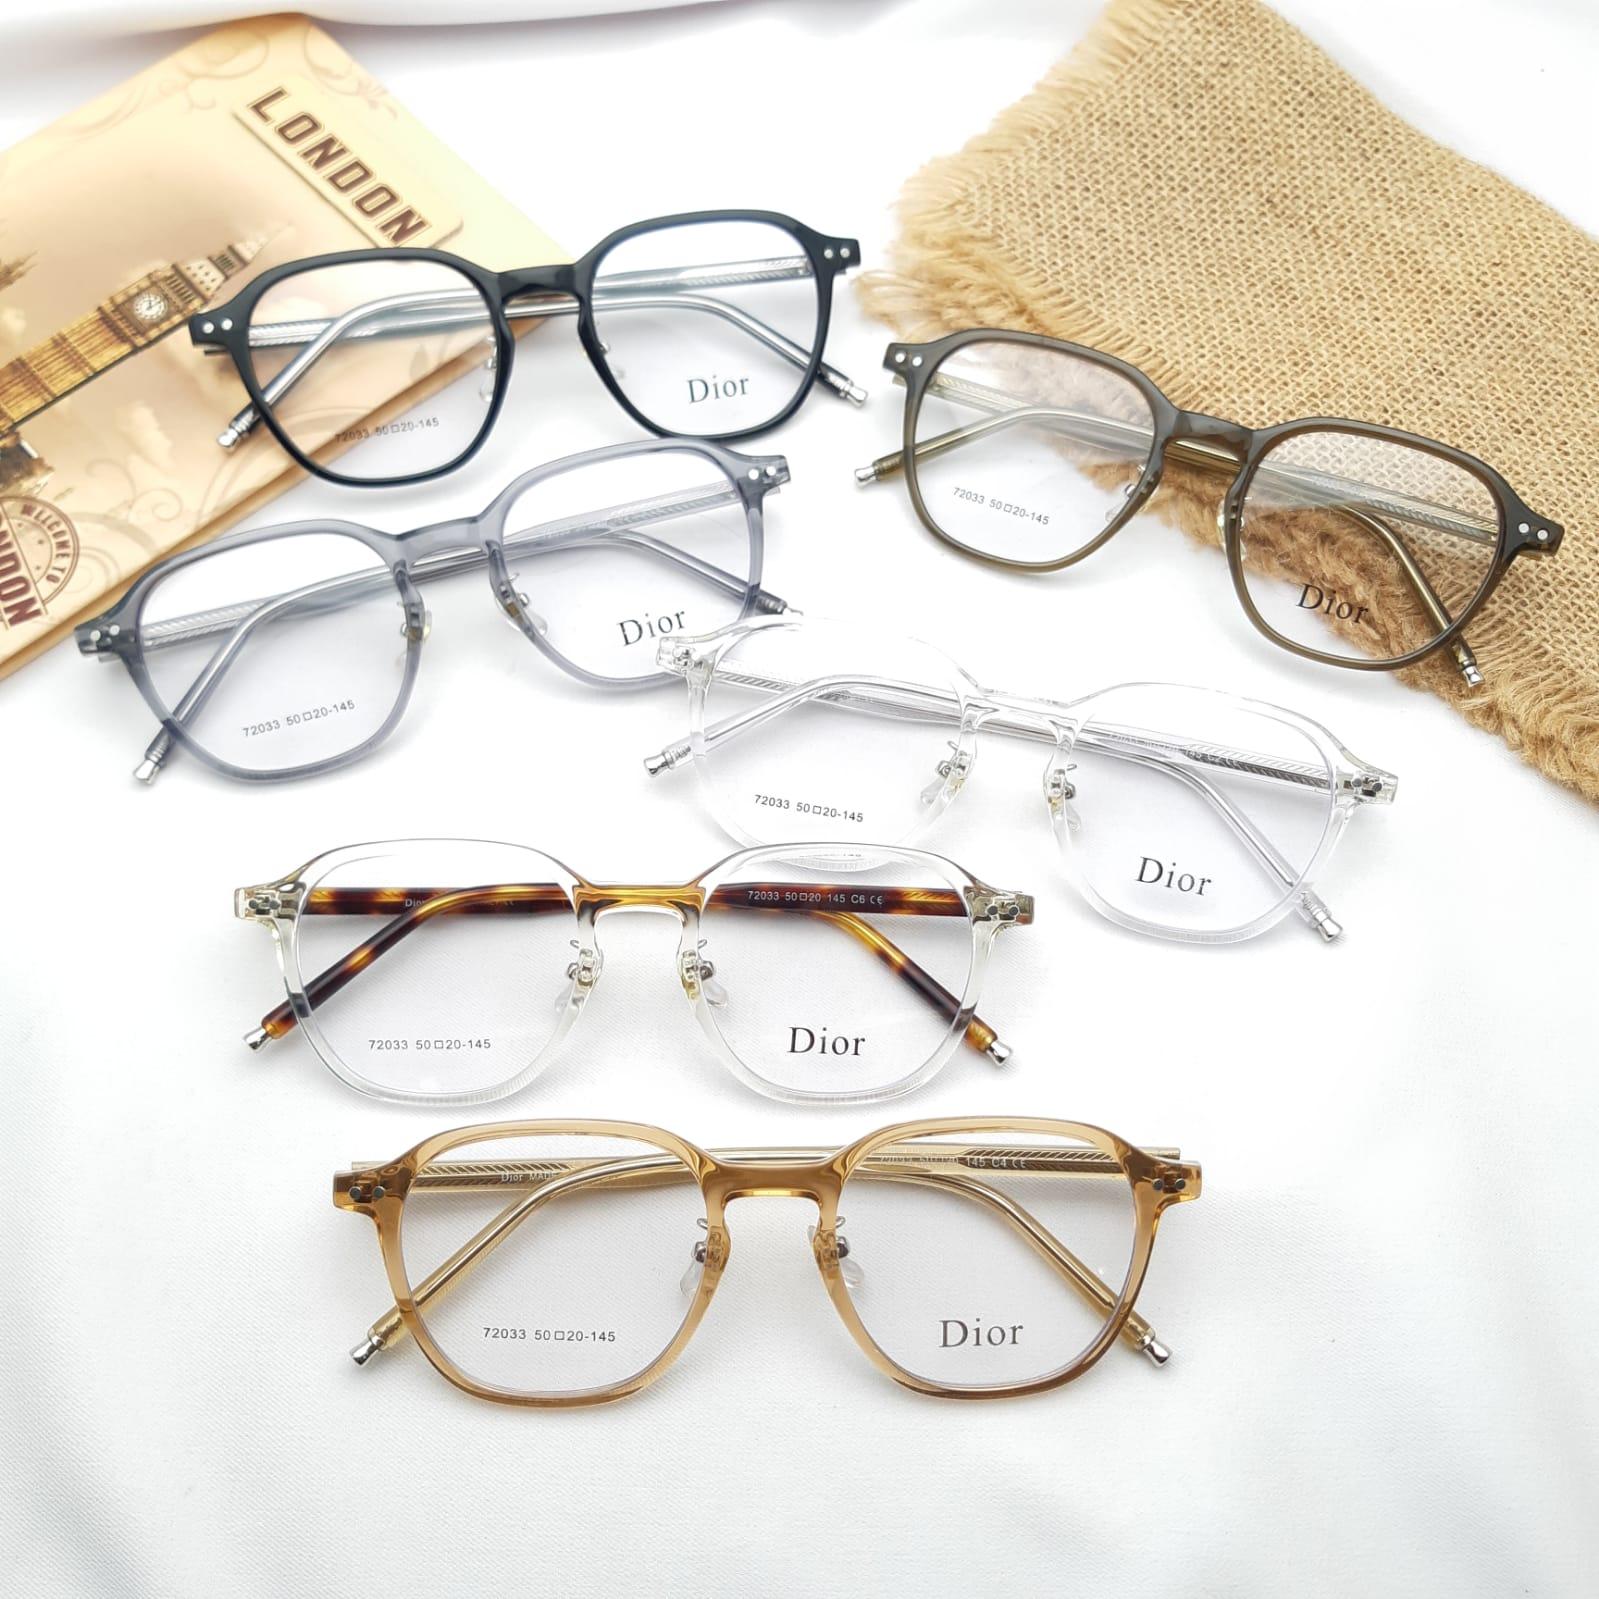 Dior Spectacles